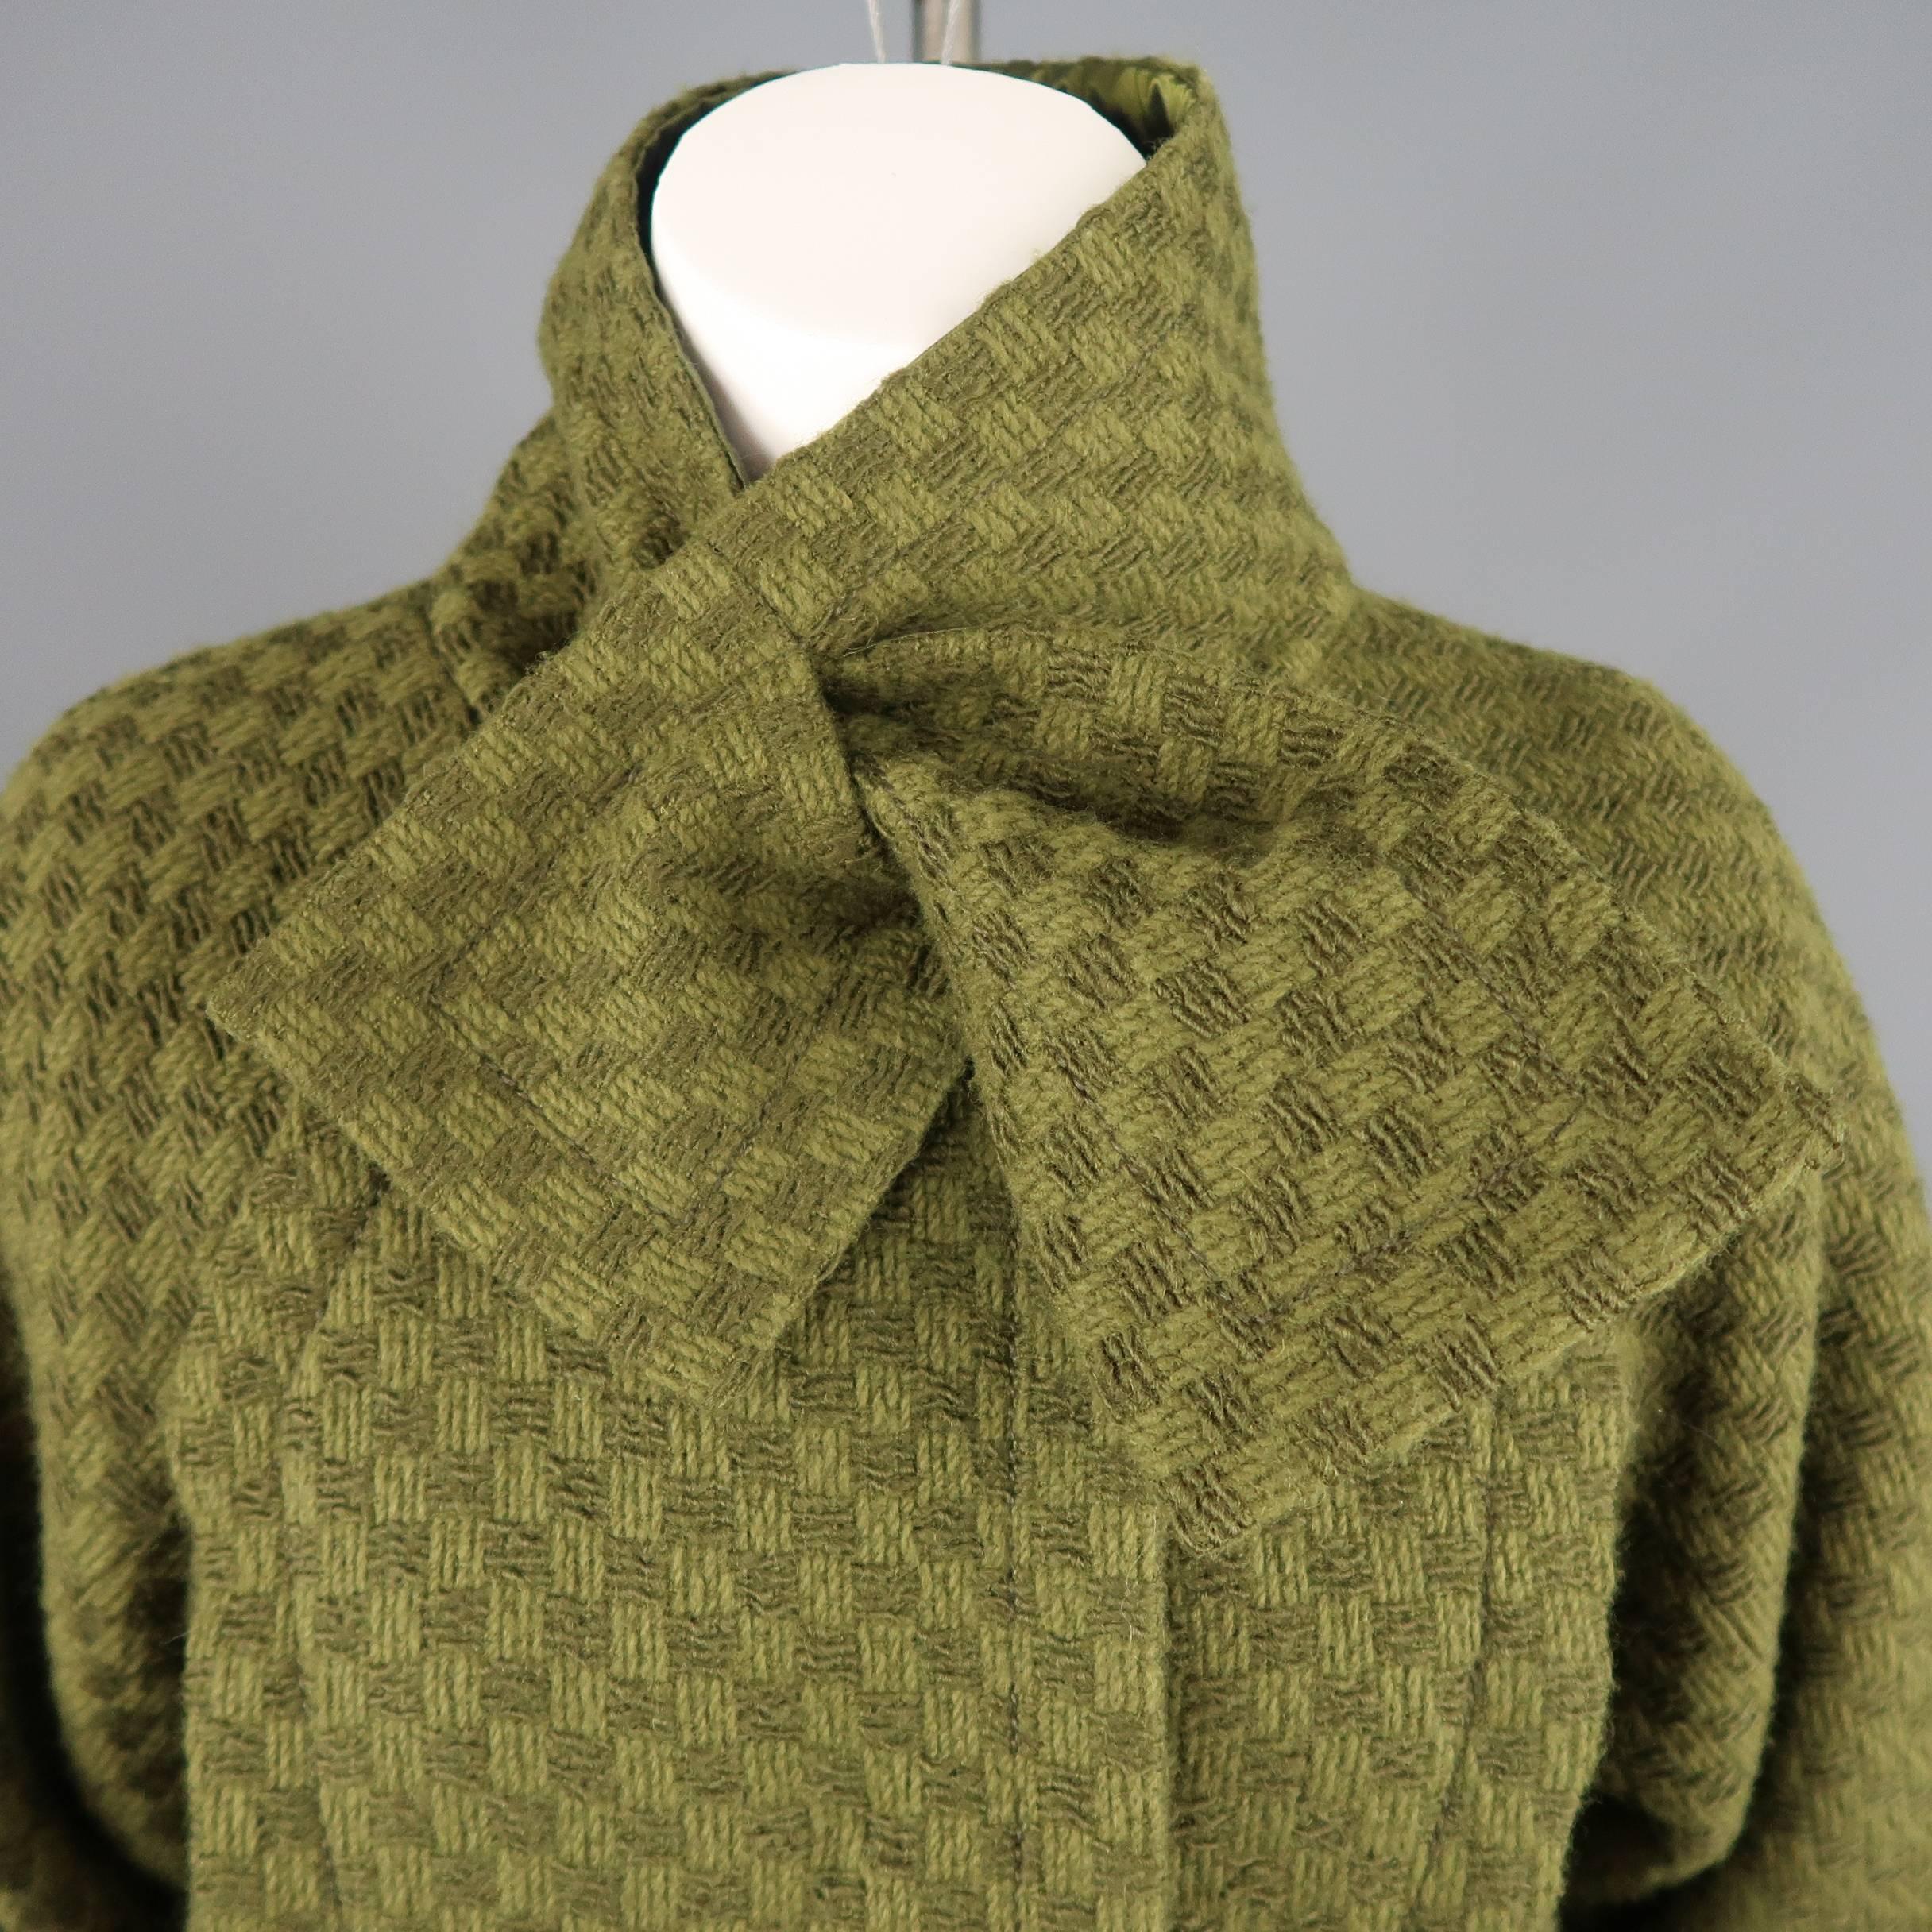 Louis Vuitton coat comes in army green Damier checkered textured wool tweed and features a high, bow sash collar, pleated pockets, overlay chest, gathered sleeves, and pleat slit back. Made in France.
 
Excellent Pre-Owned Condition.
Marked: FR 36
